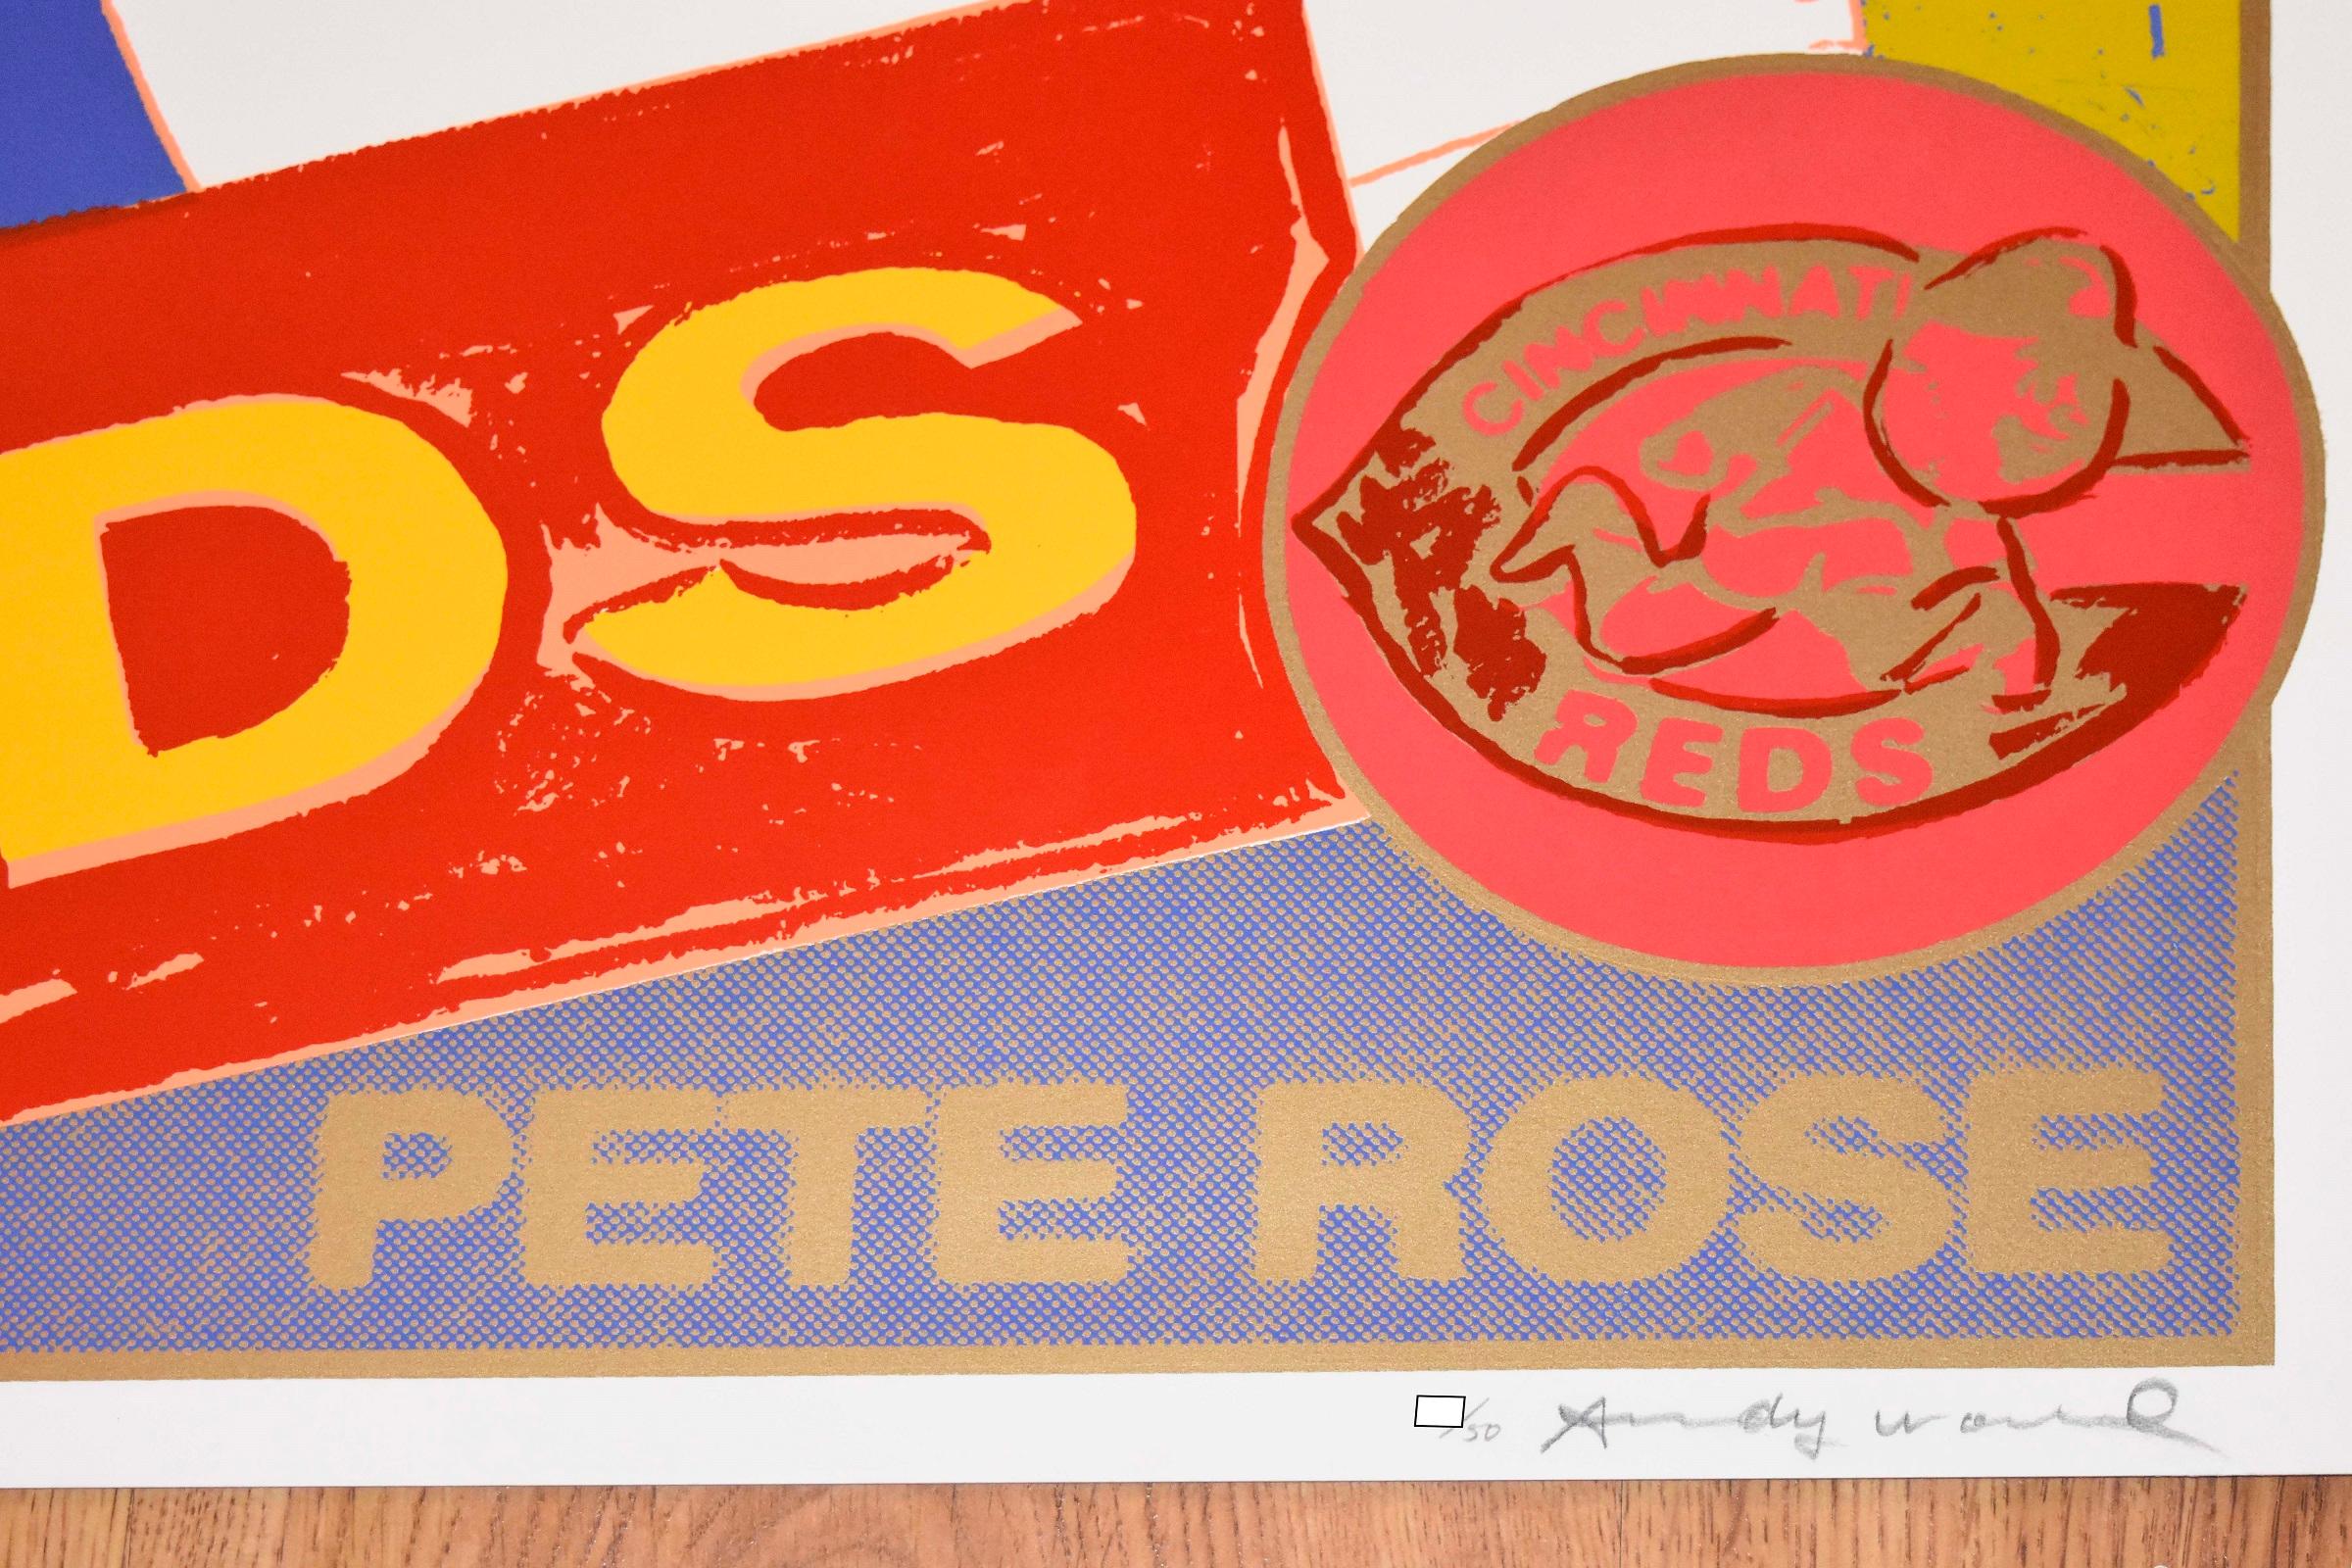 This Warhol work consists of a blue and gold background with a portrait of Pete Rose holding a baseball bat and a banner that says 